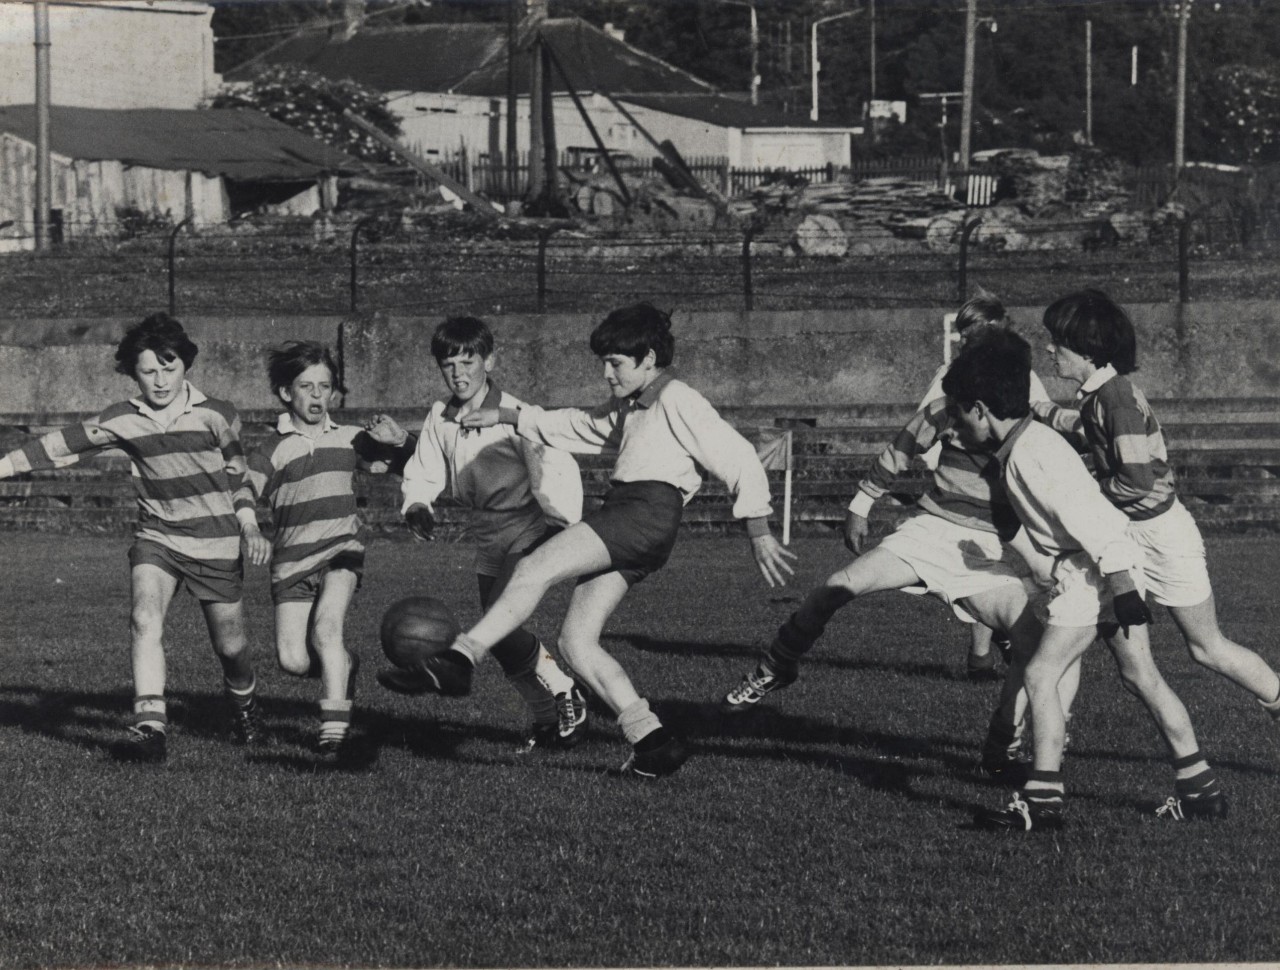 A group of kids playing soccer